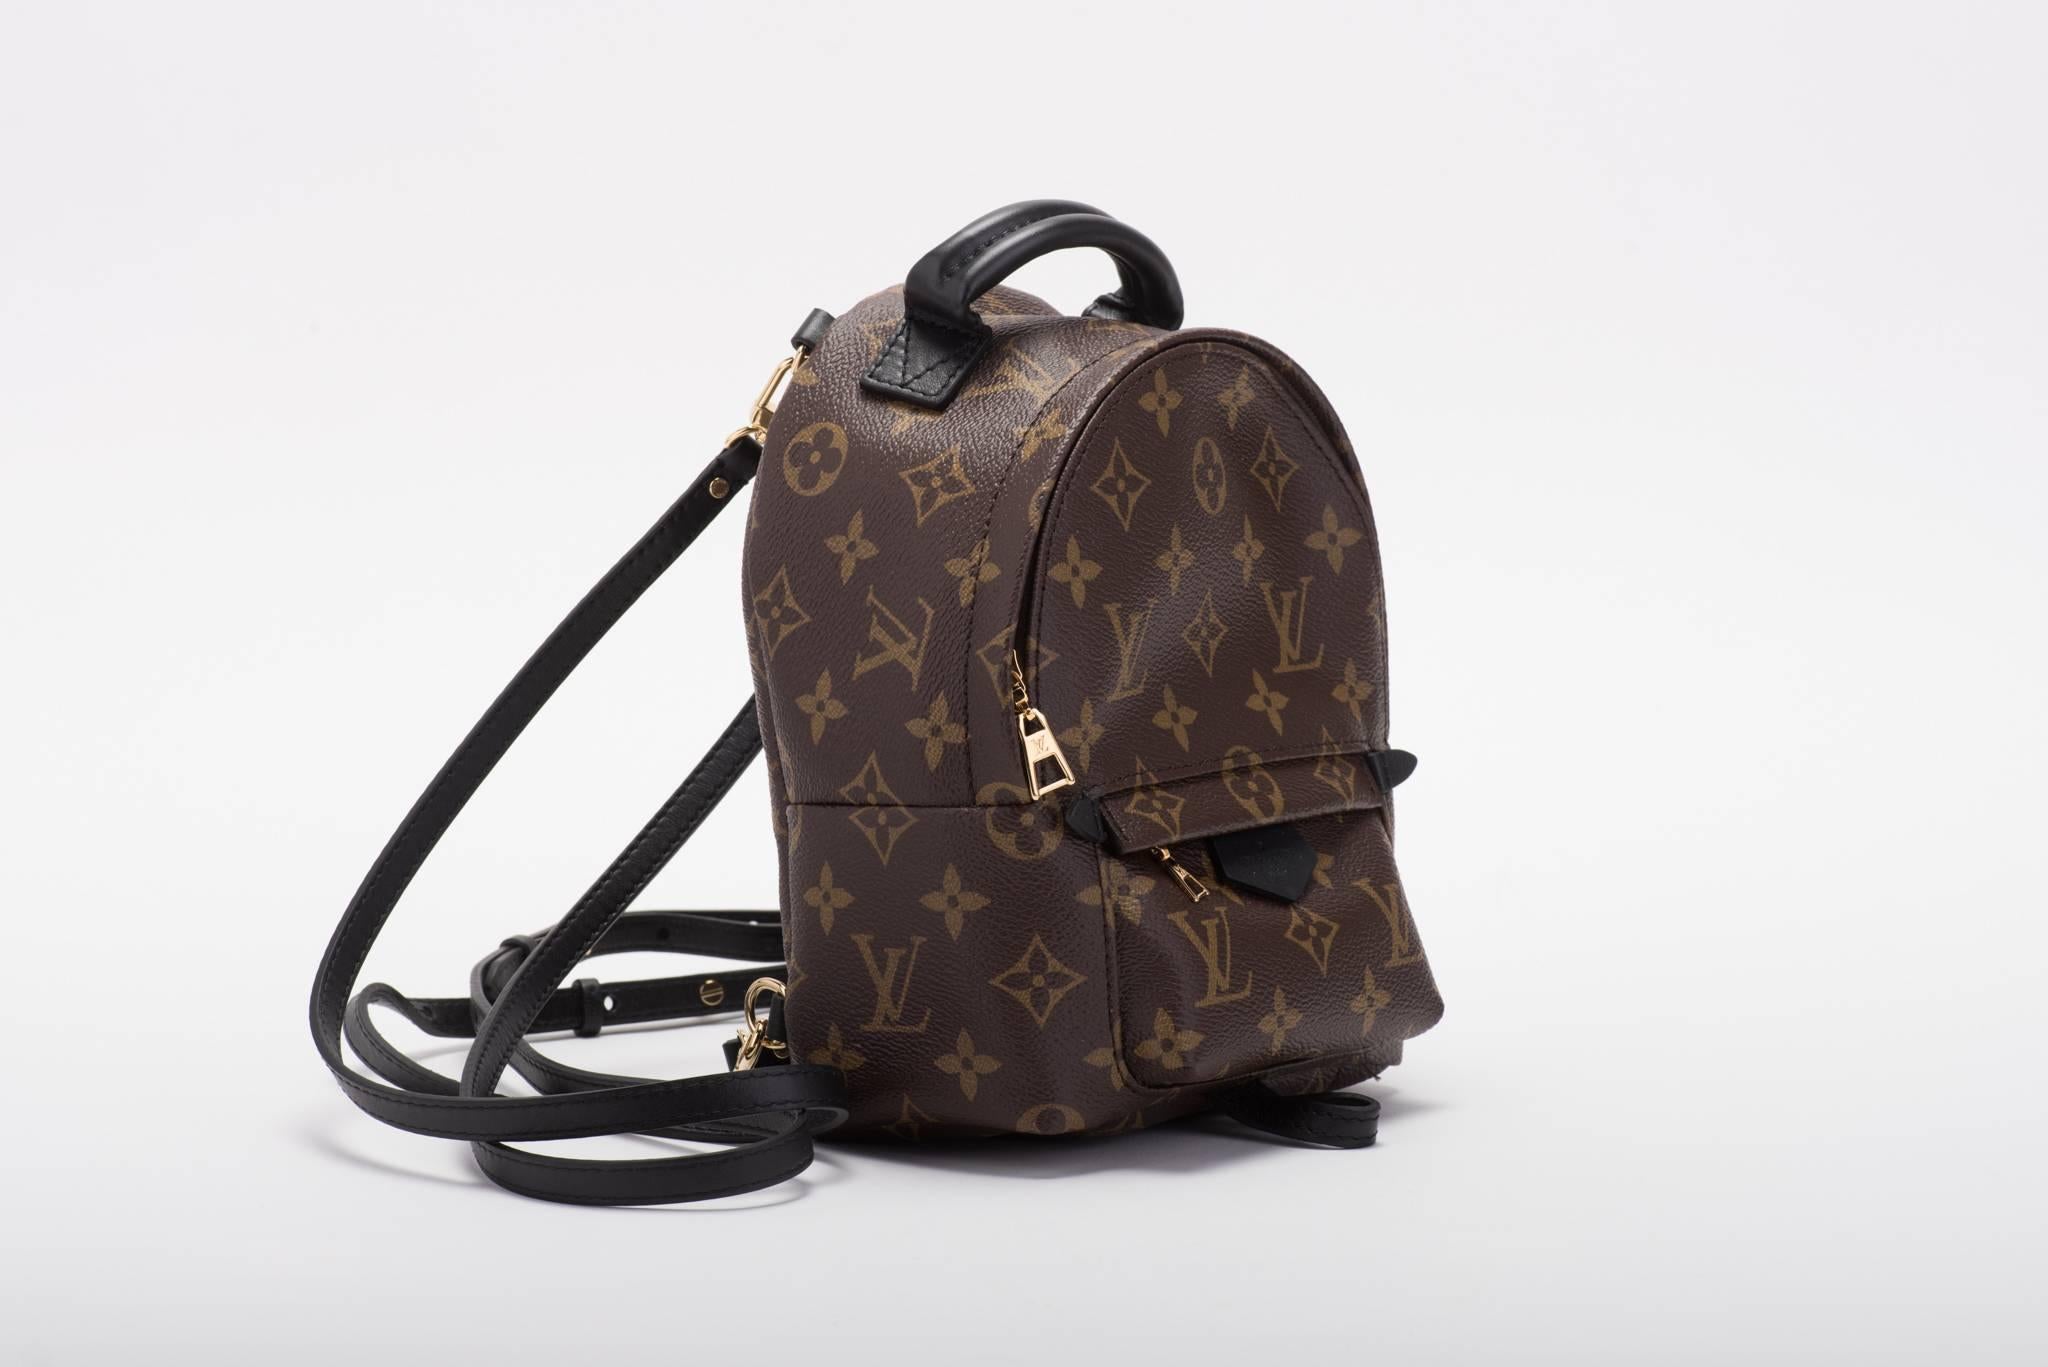 Louis Vuitton SOLD OUT mini monogram backpack. 
Nicolas Ghesquière new take on a very classic staple of the Vuitton collection. 
The mini monogram canvas sports a multi-positional strap for cross-body wear. 
Brand new in box with booklet, dust cover